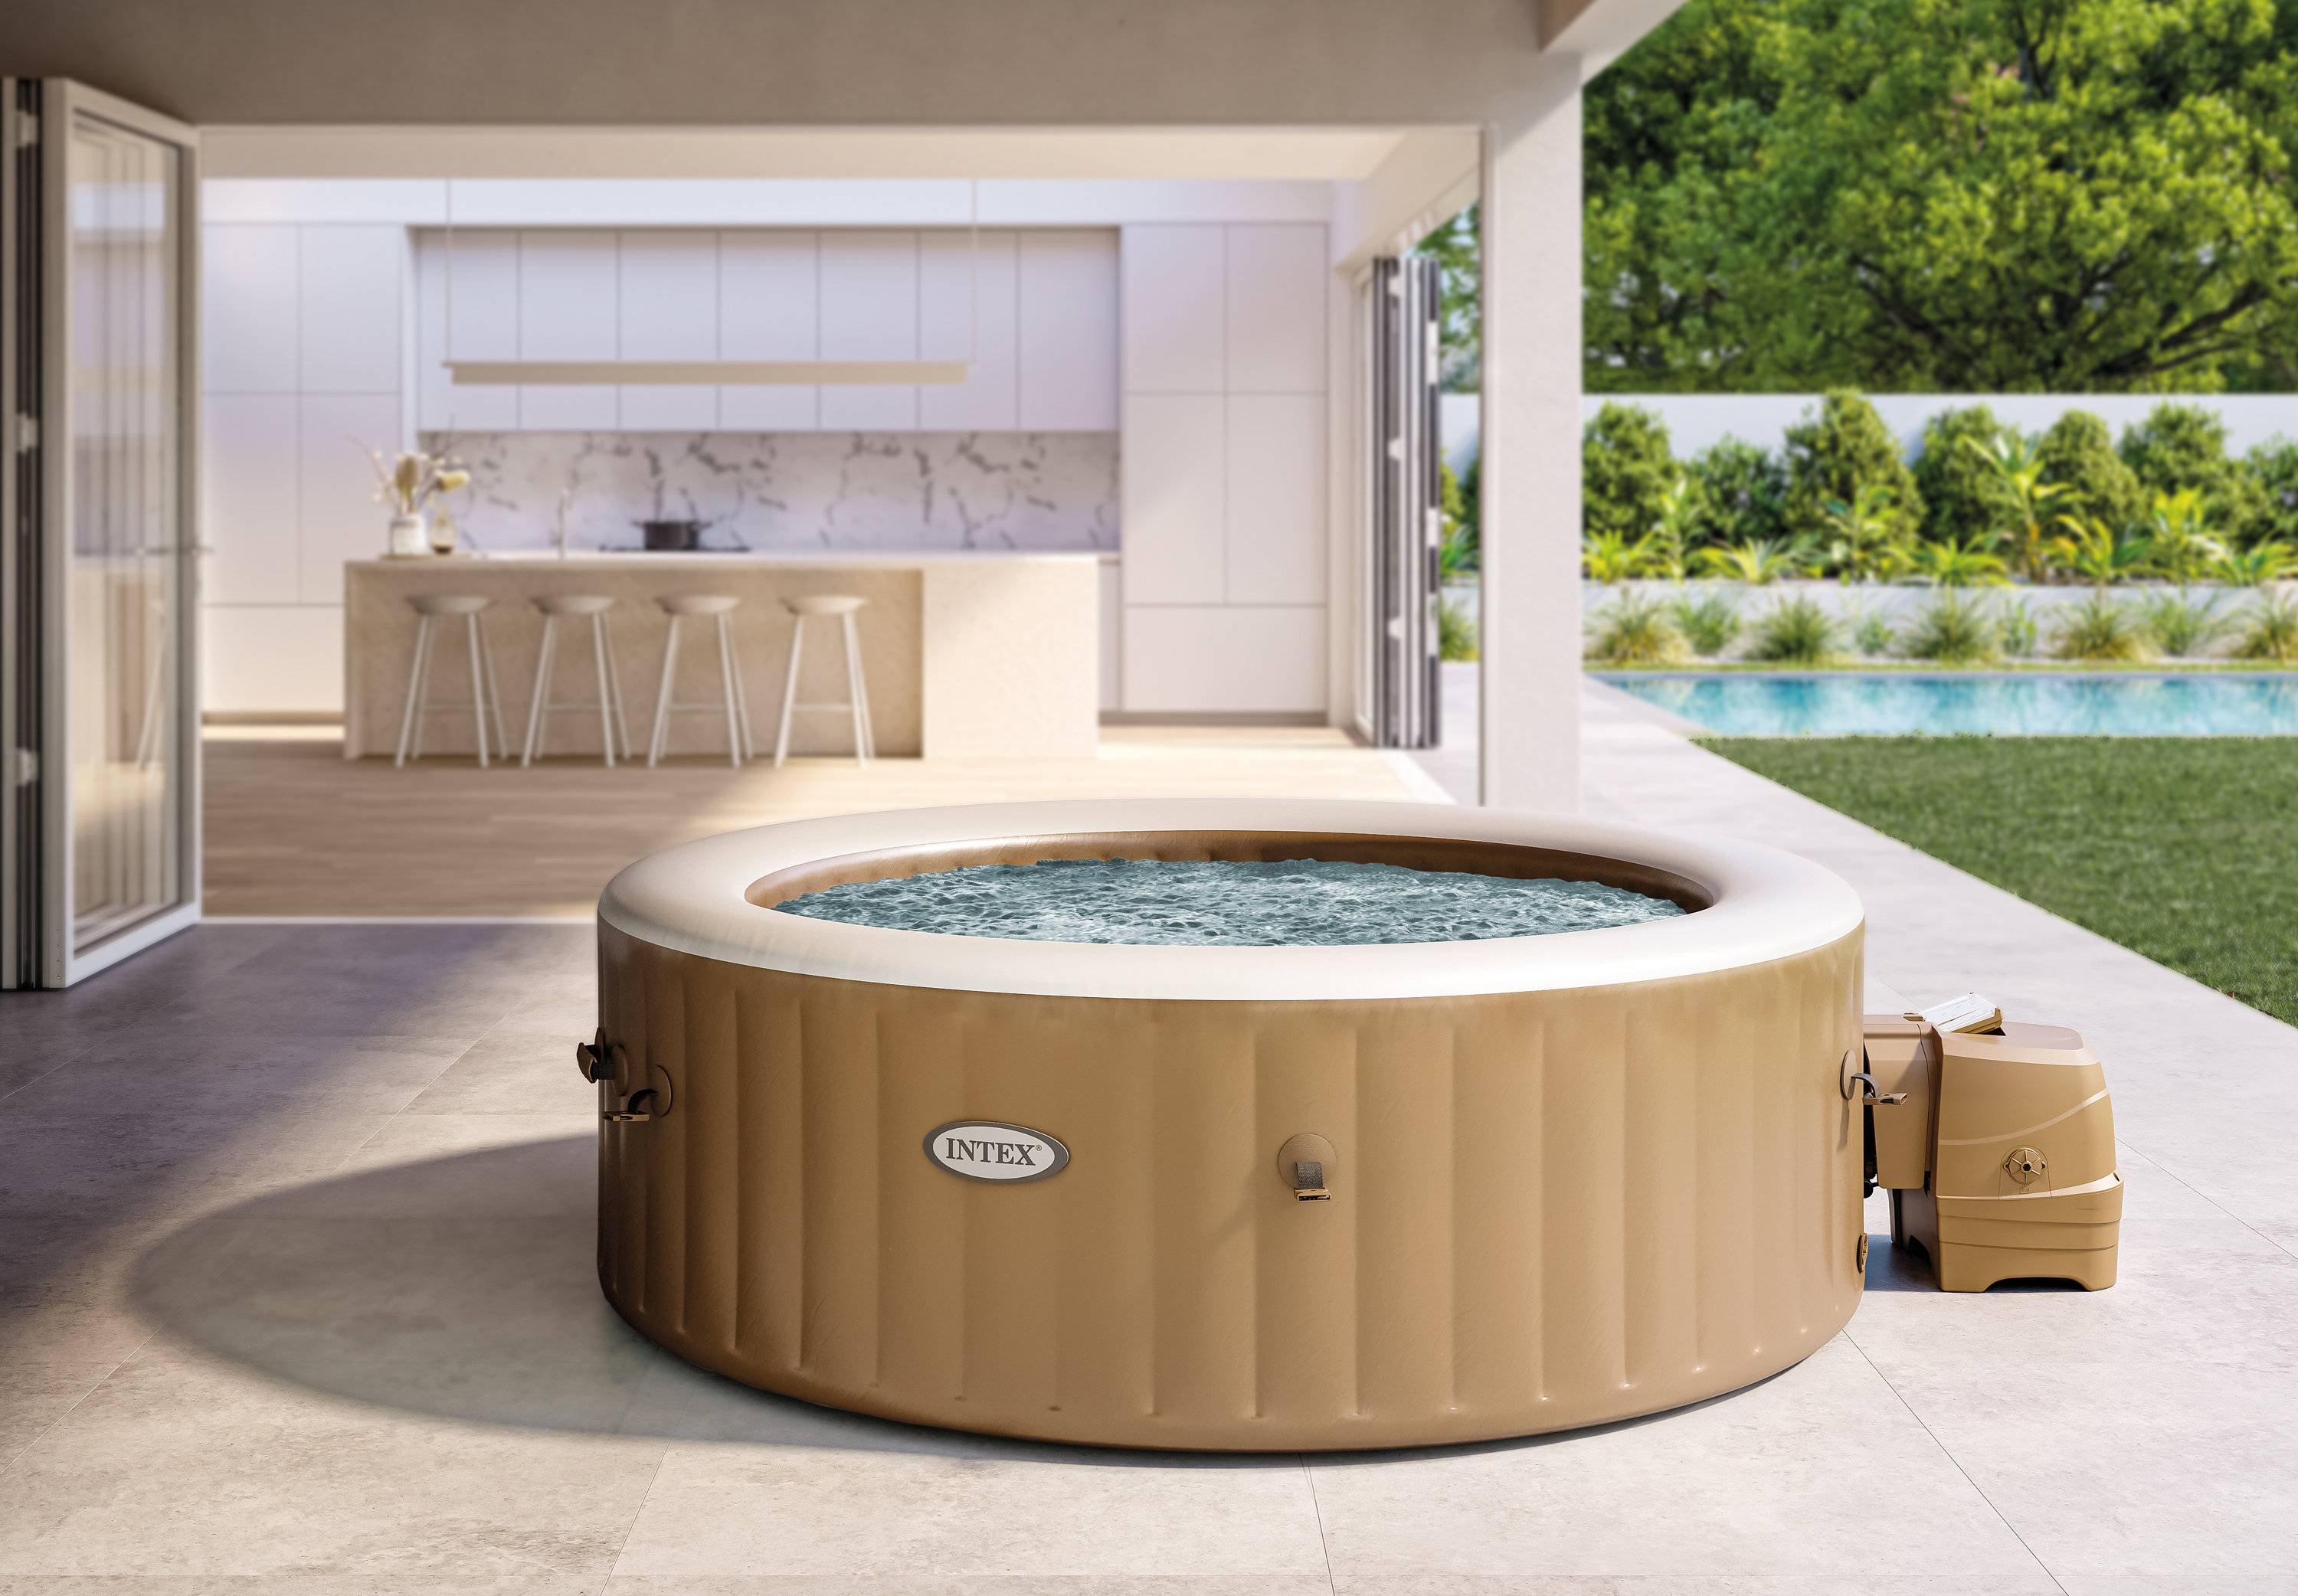 Spa gonflable Intex PureSpa Sahara rond 6 places beige